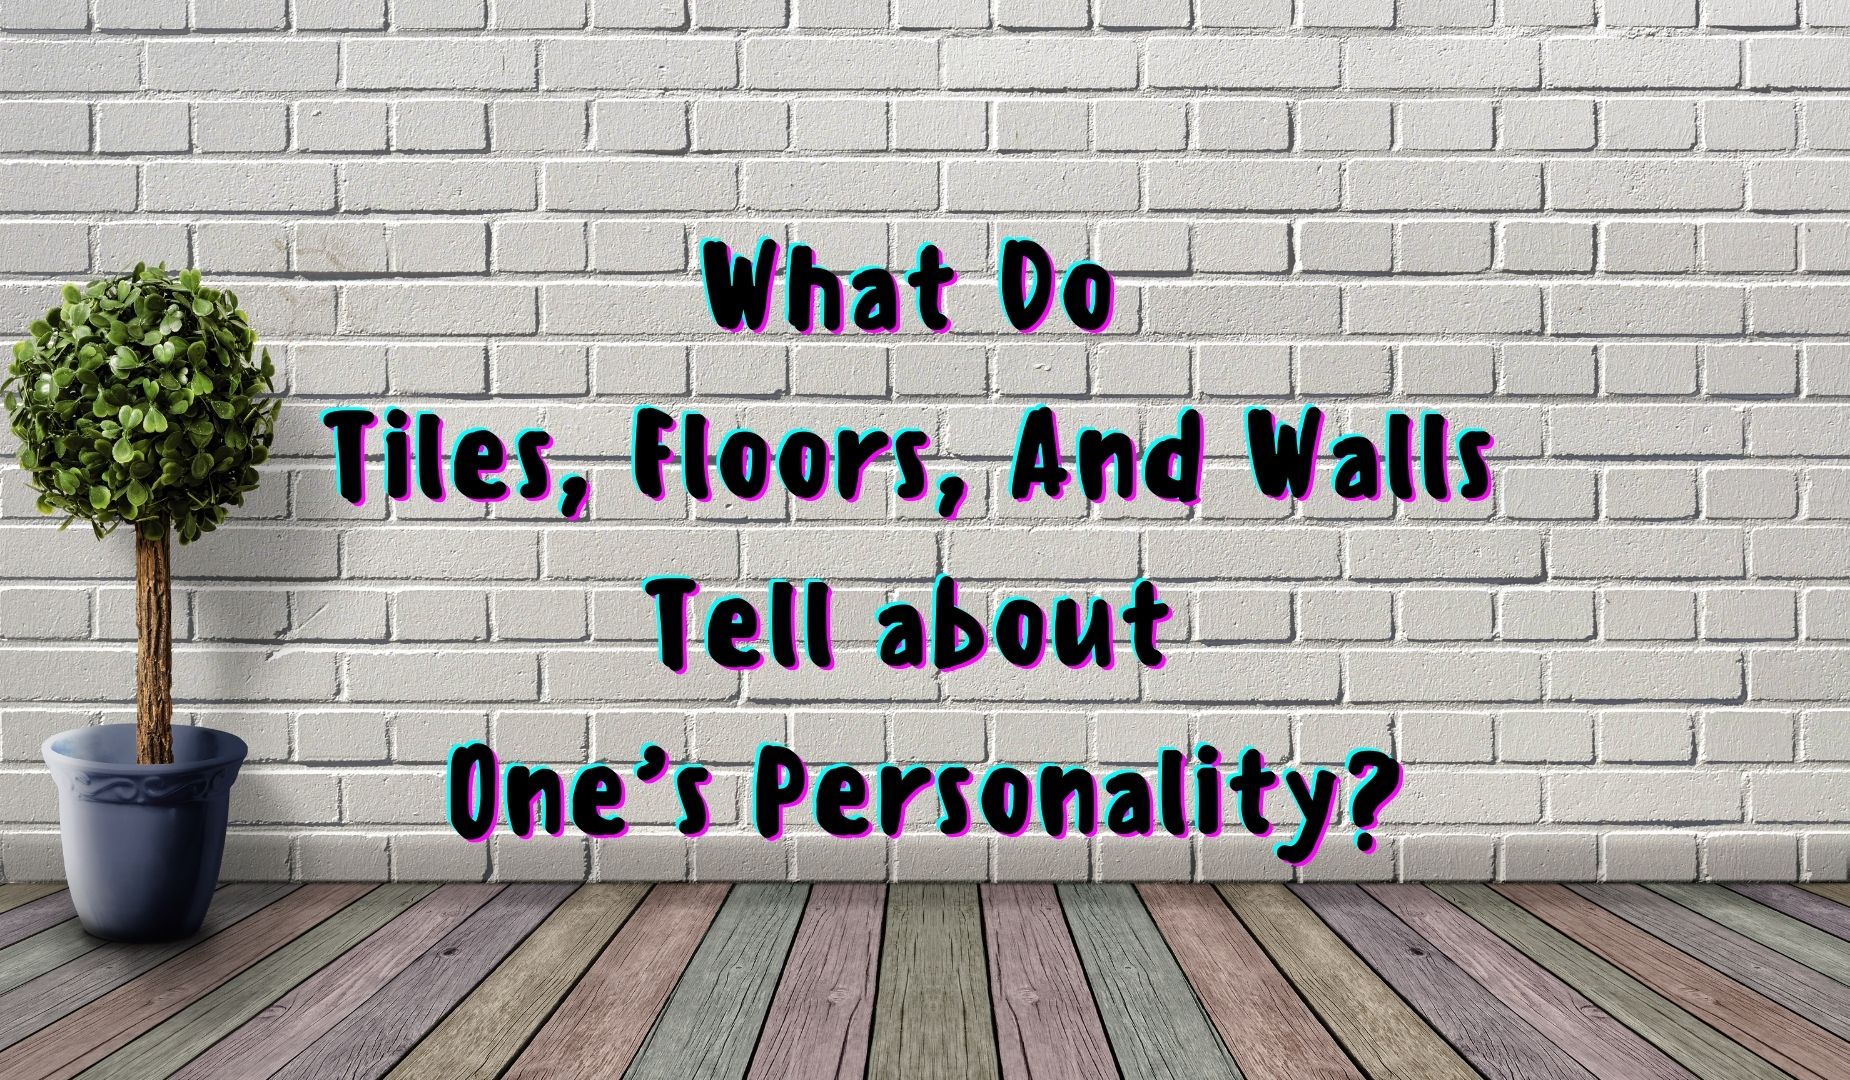 What Do Tiles, Floors, And Walls Tell about One’s Personality?